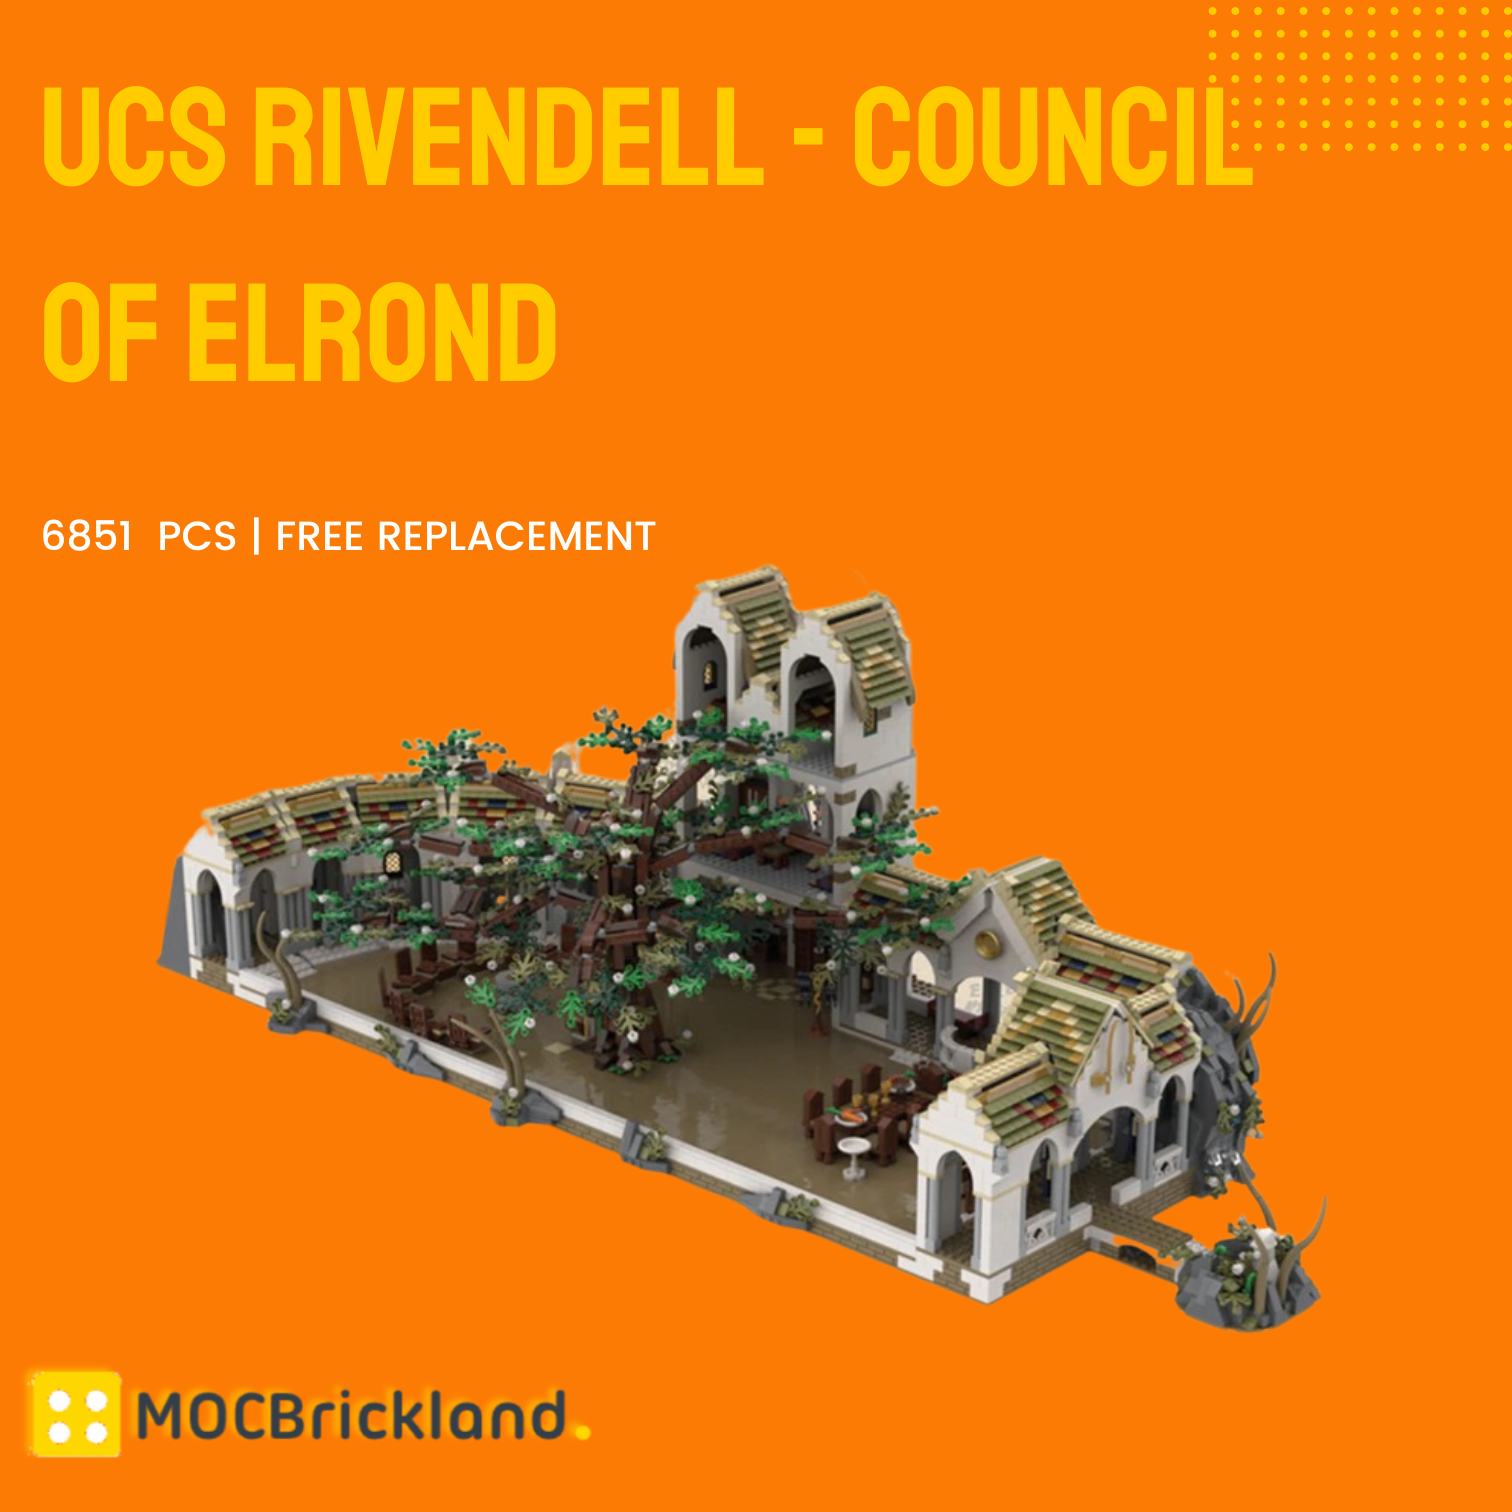 The Council of Elrond PDF